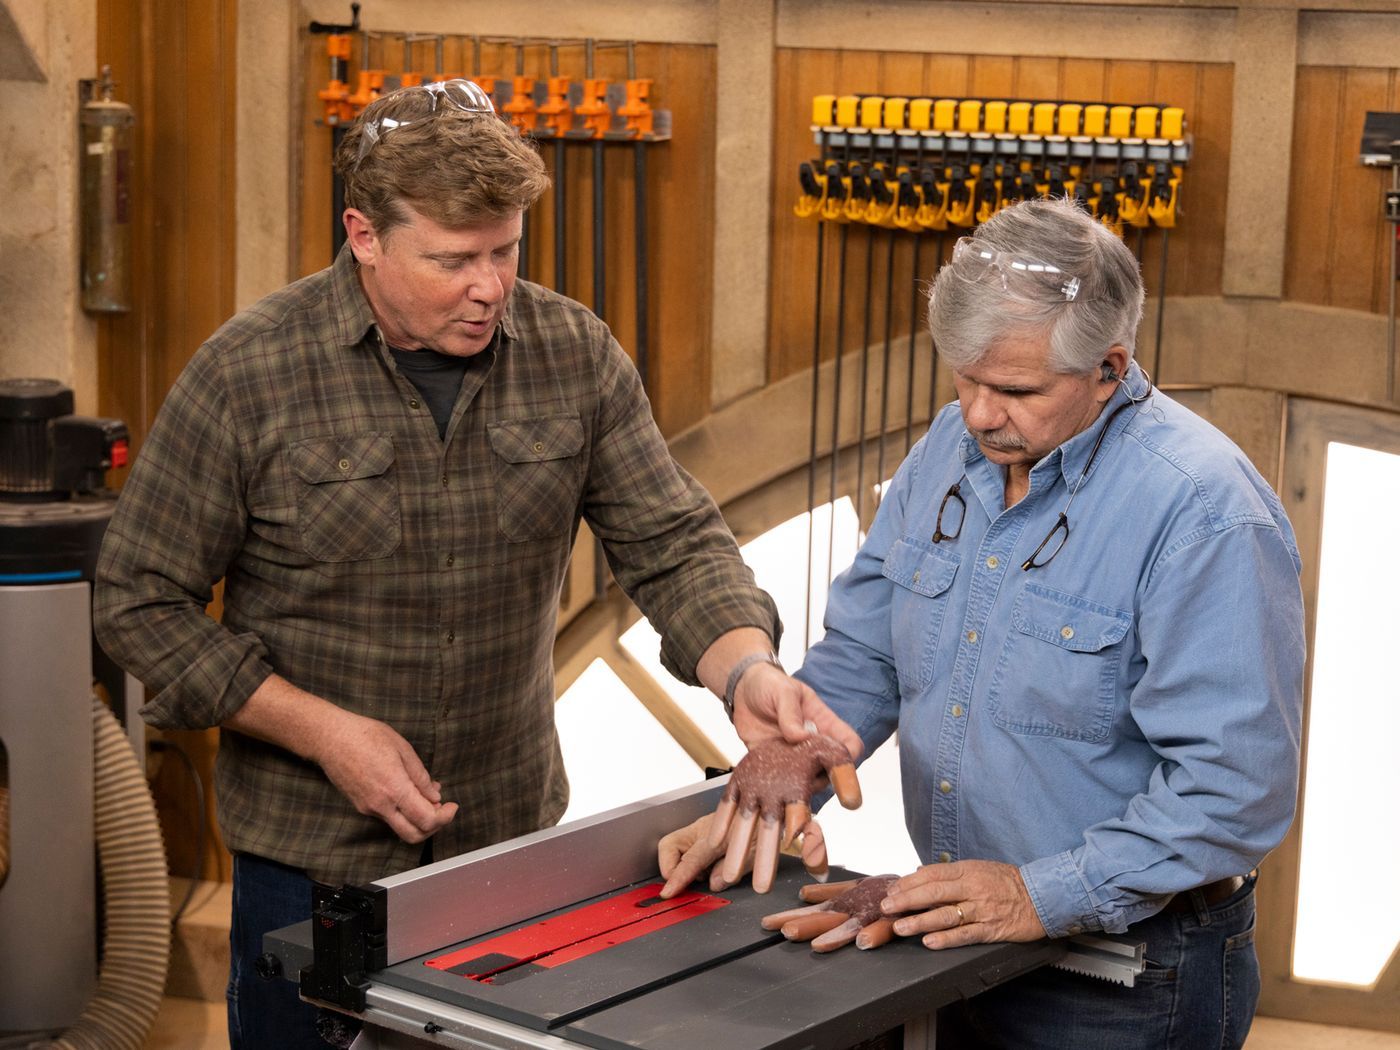 S21 E25, Tom Silva demonstrates table saw safety features for Kevin O'Connor